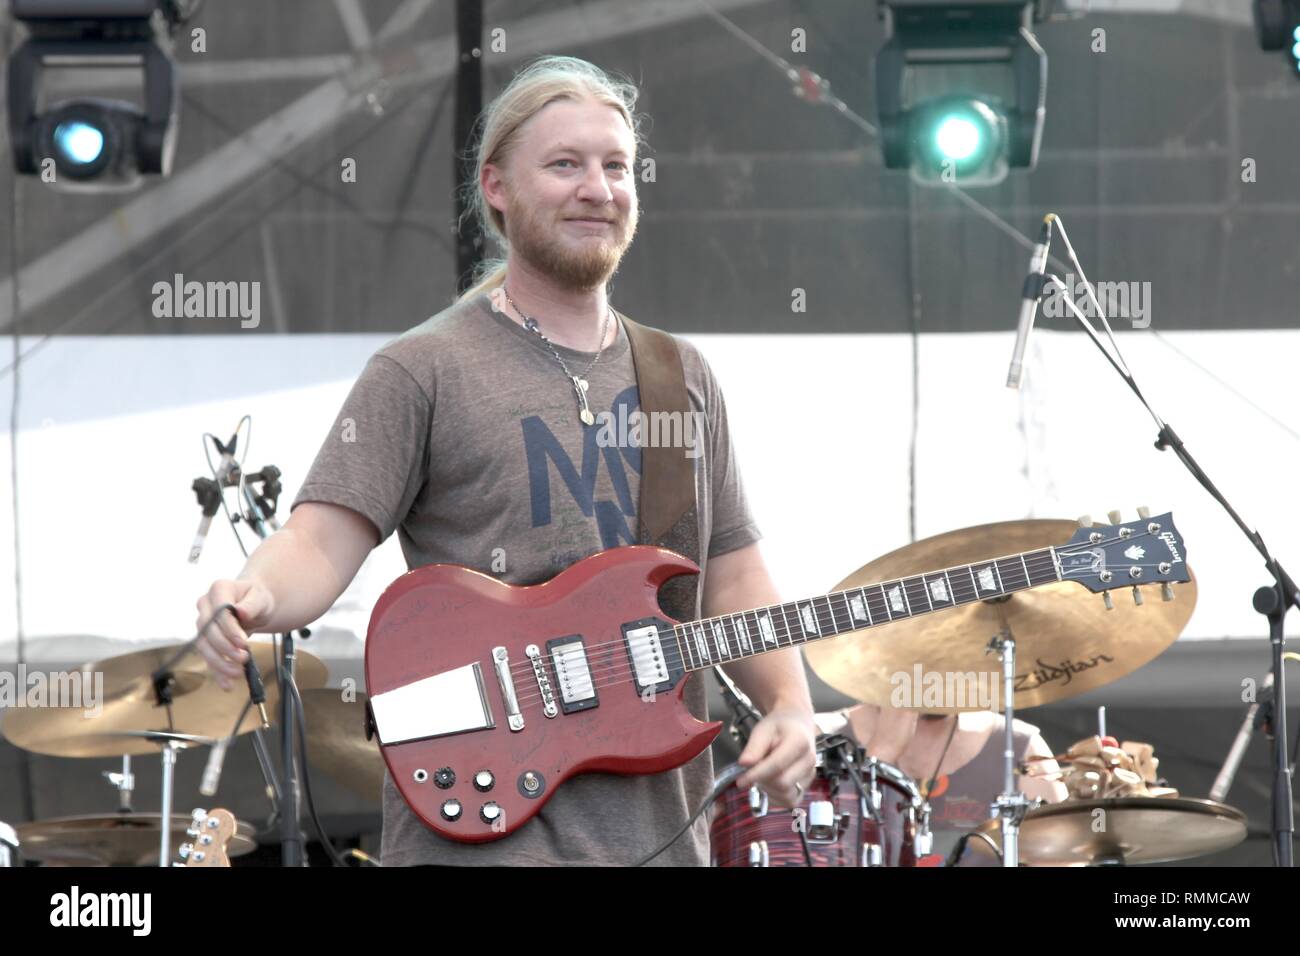 Guitarist Derek Trucks is shown performing on stage during a 'live' concert with Tedeschi & Trucks. Stock Photo